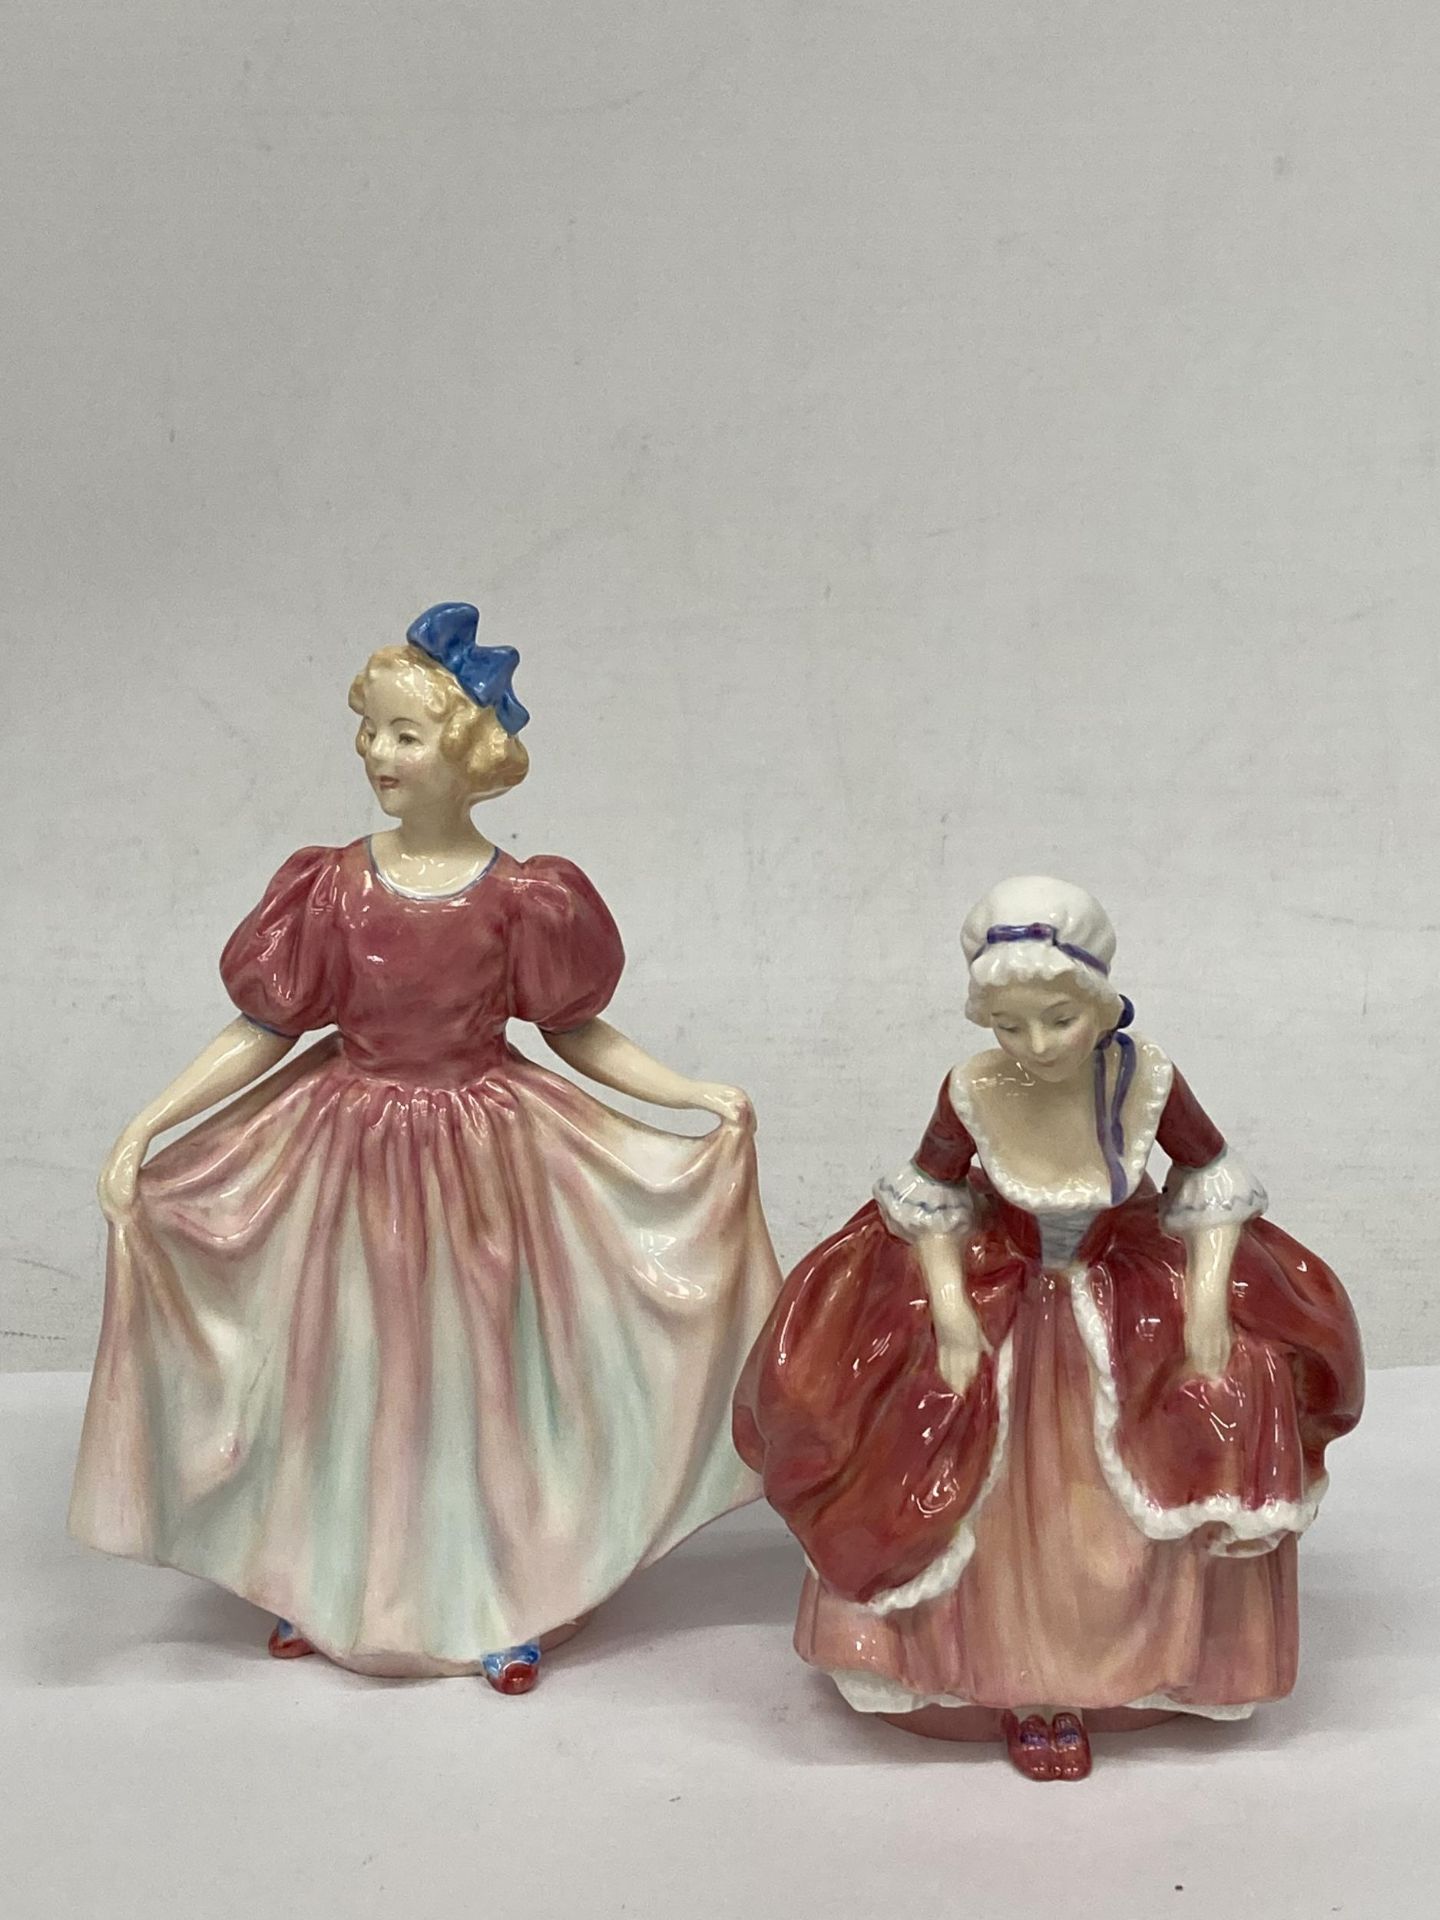 TWO ROYAL DOULTON FIGURINES "GOODY TWO SHOES" HN2037 AND "SWEETING" HN 1935